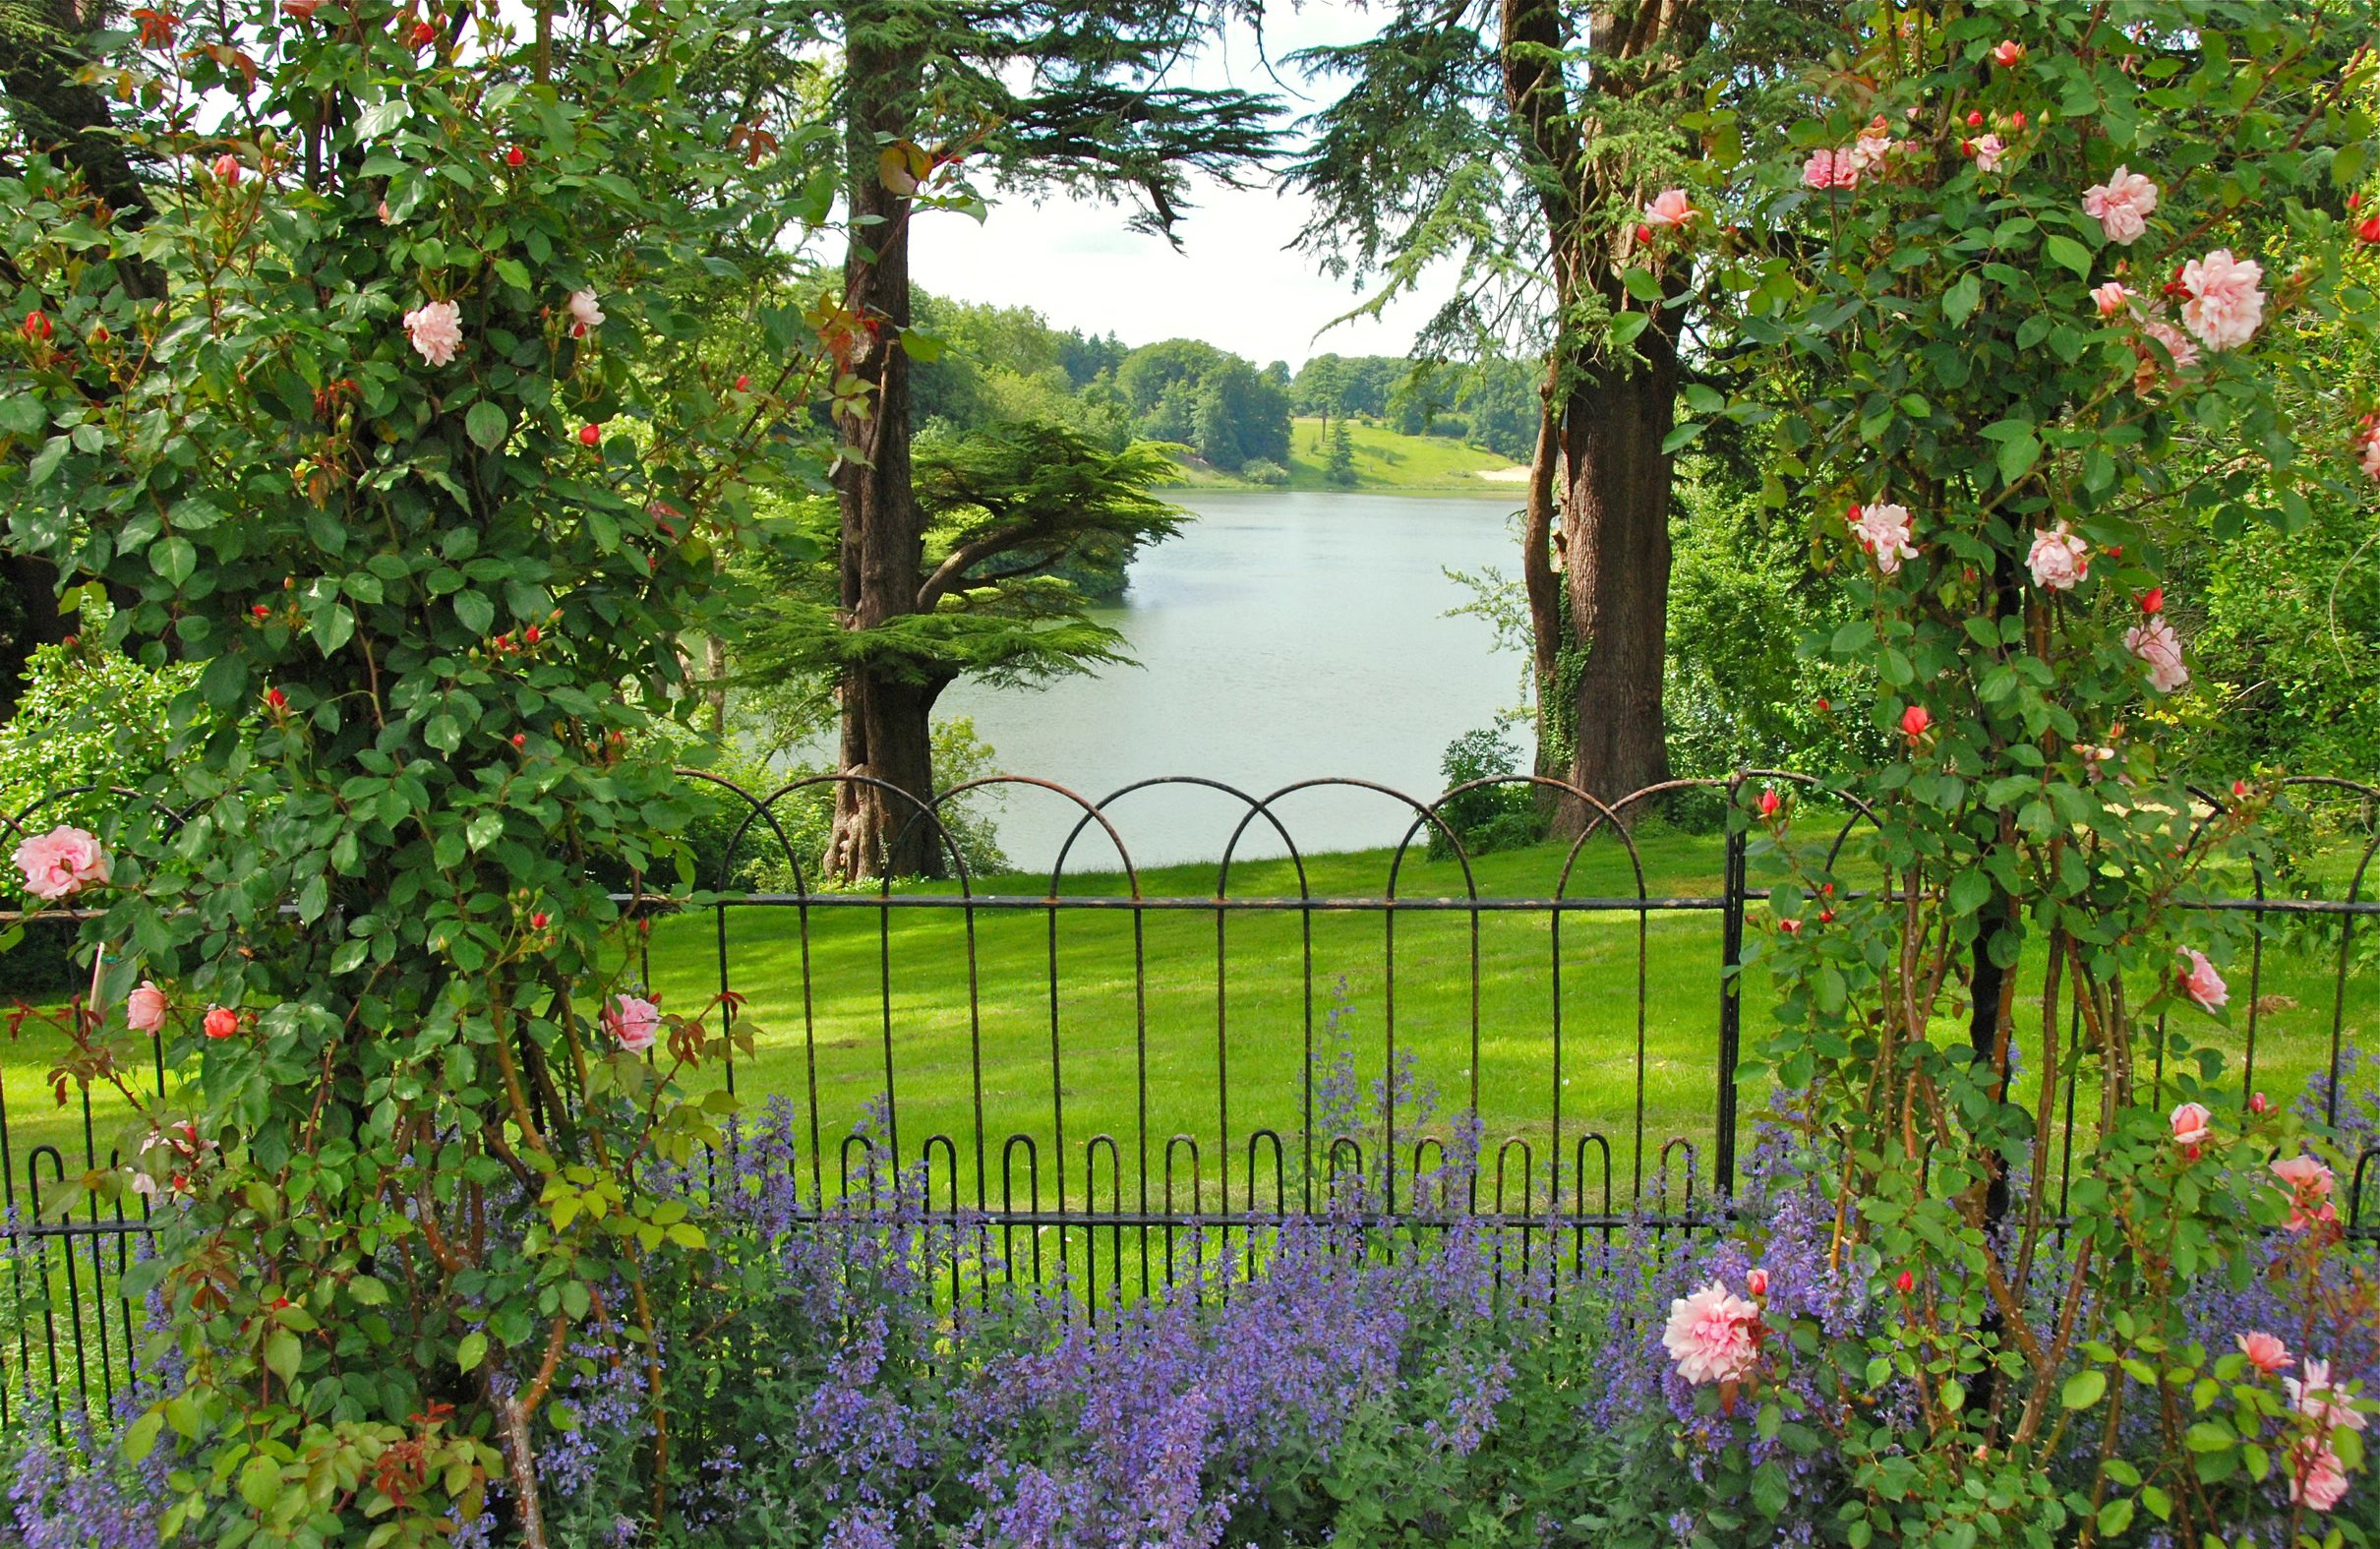 united, Kingdom, Parks, Rivers, Roses, Fence, Oxfordshire, Gardens, Nature Wallpaper